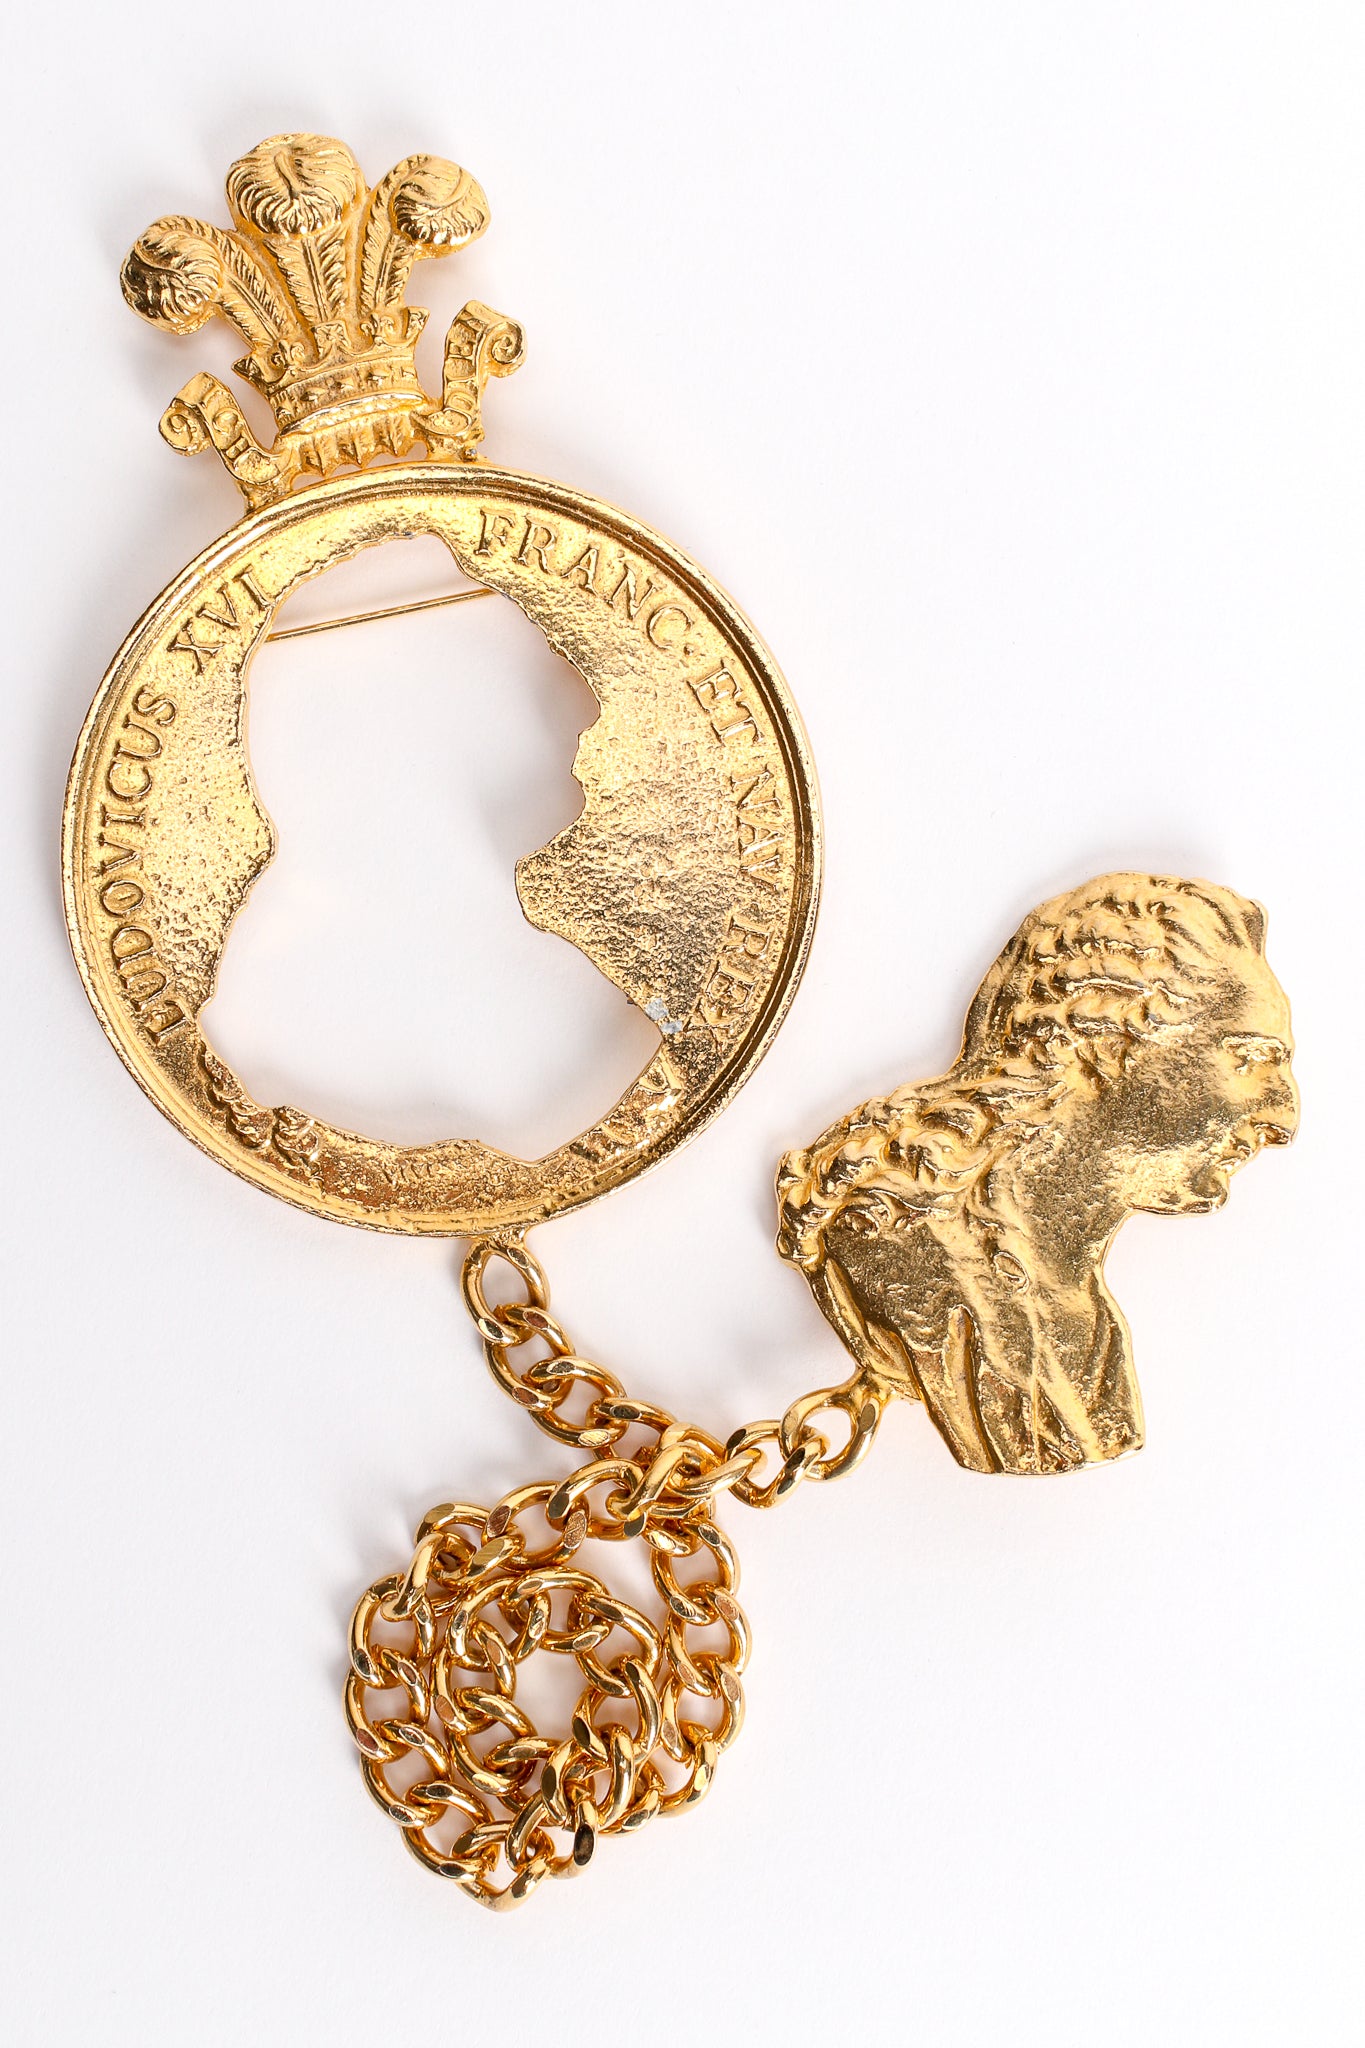 Vintage Marla Buck Silhouette Coin Cutout Chain Brooch at Recess Los Angeles